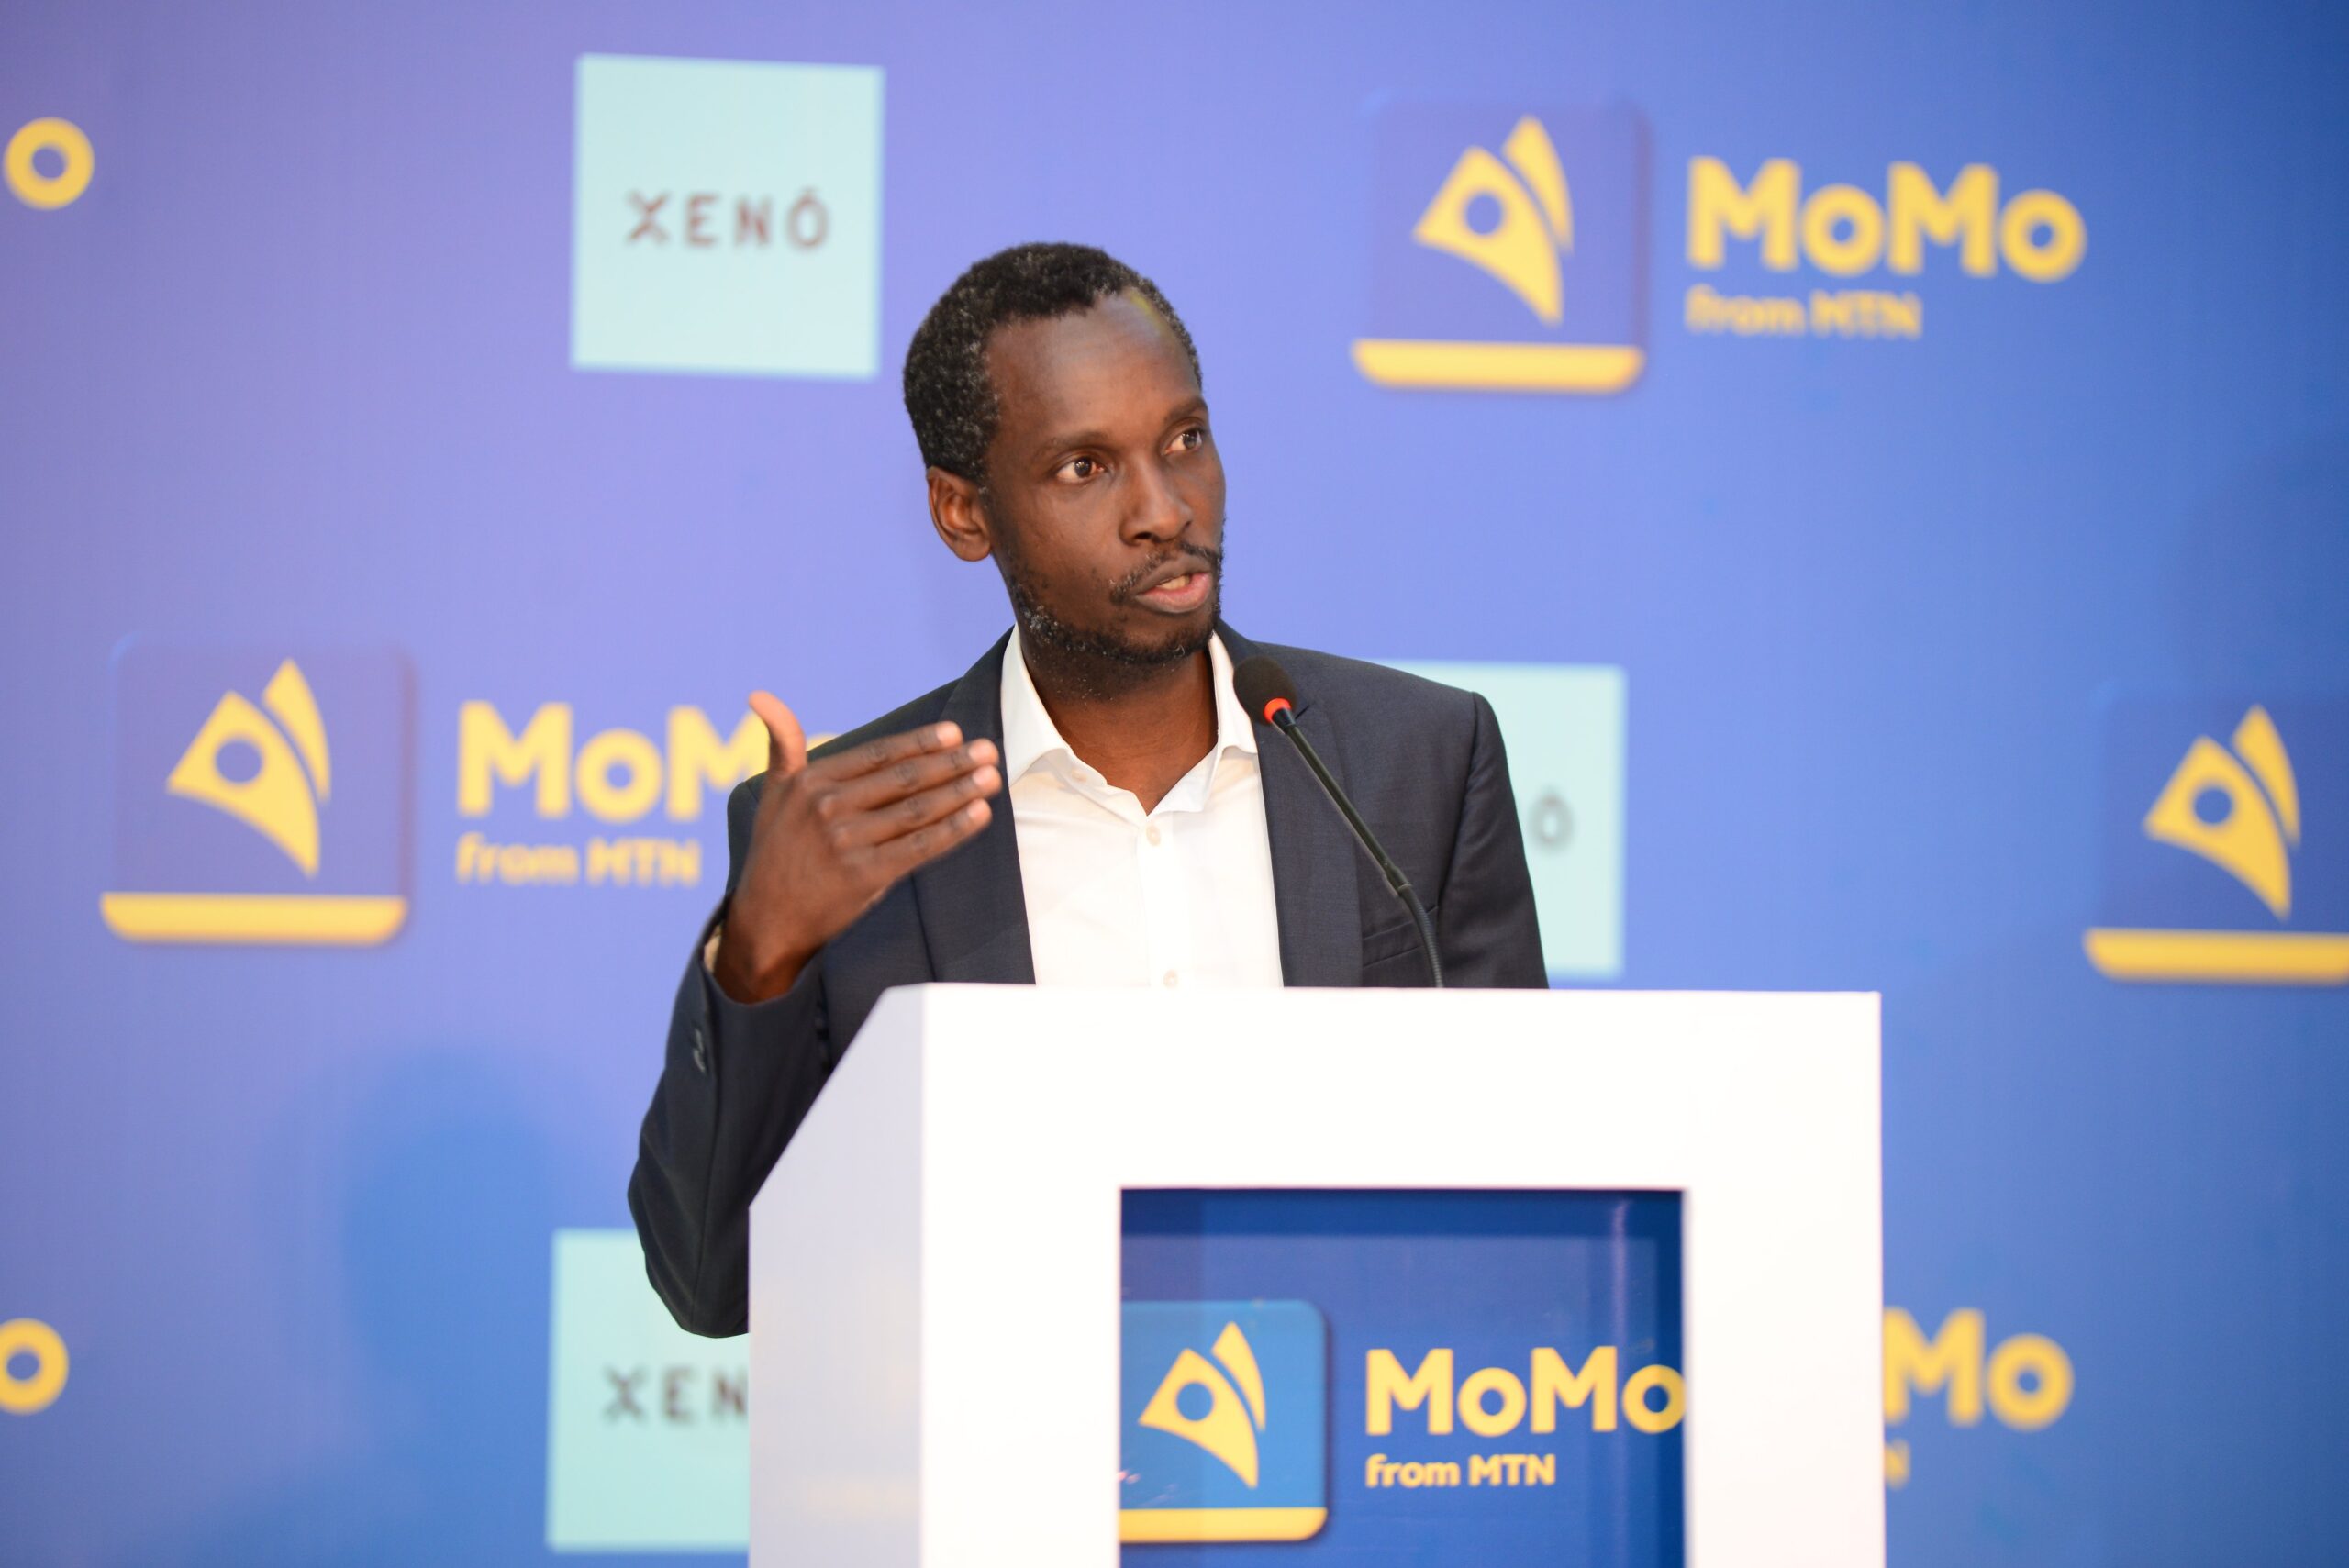 MTN MoMo ties up deal with XENO to launch goal-based investment options